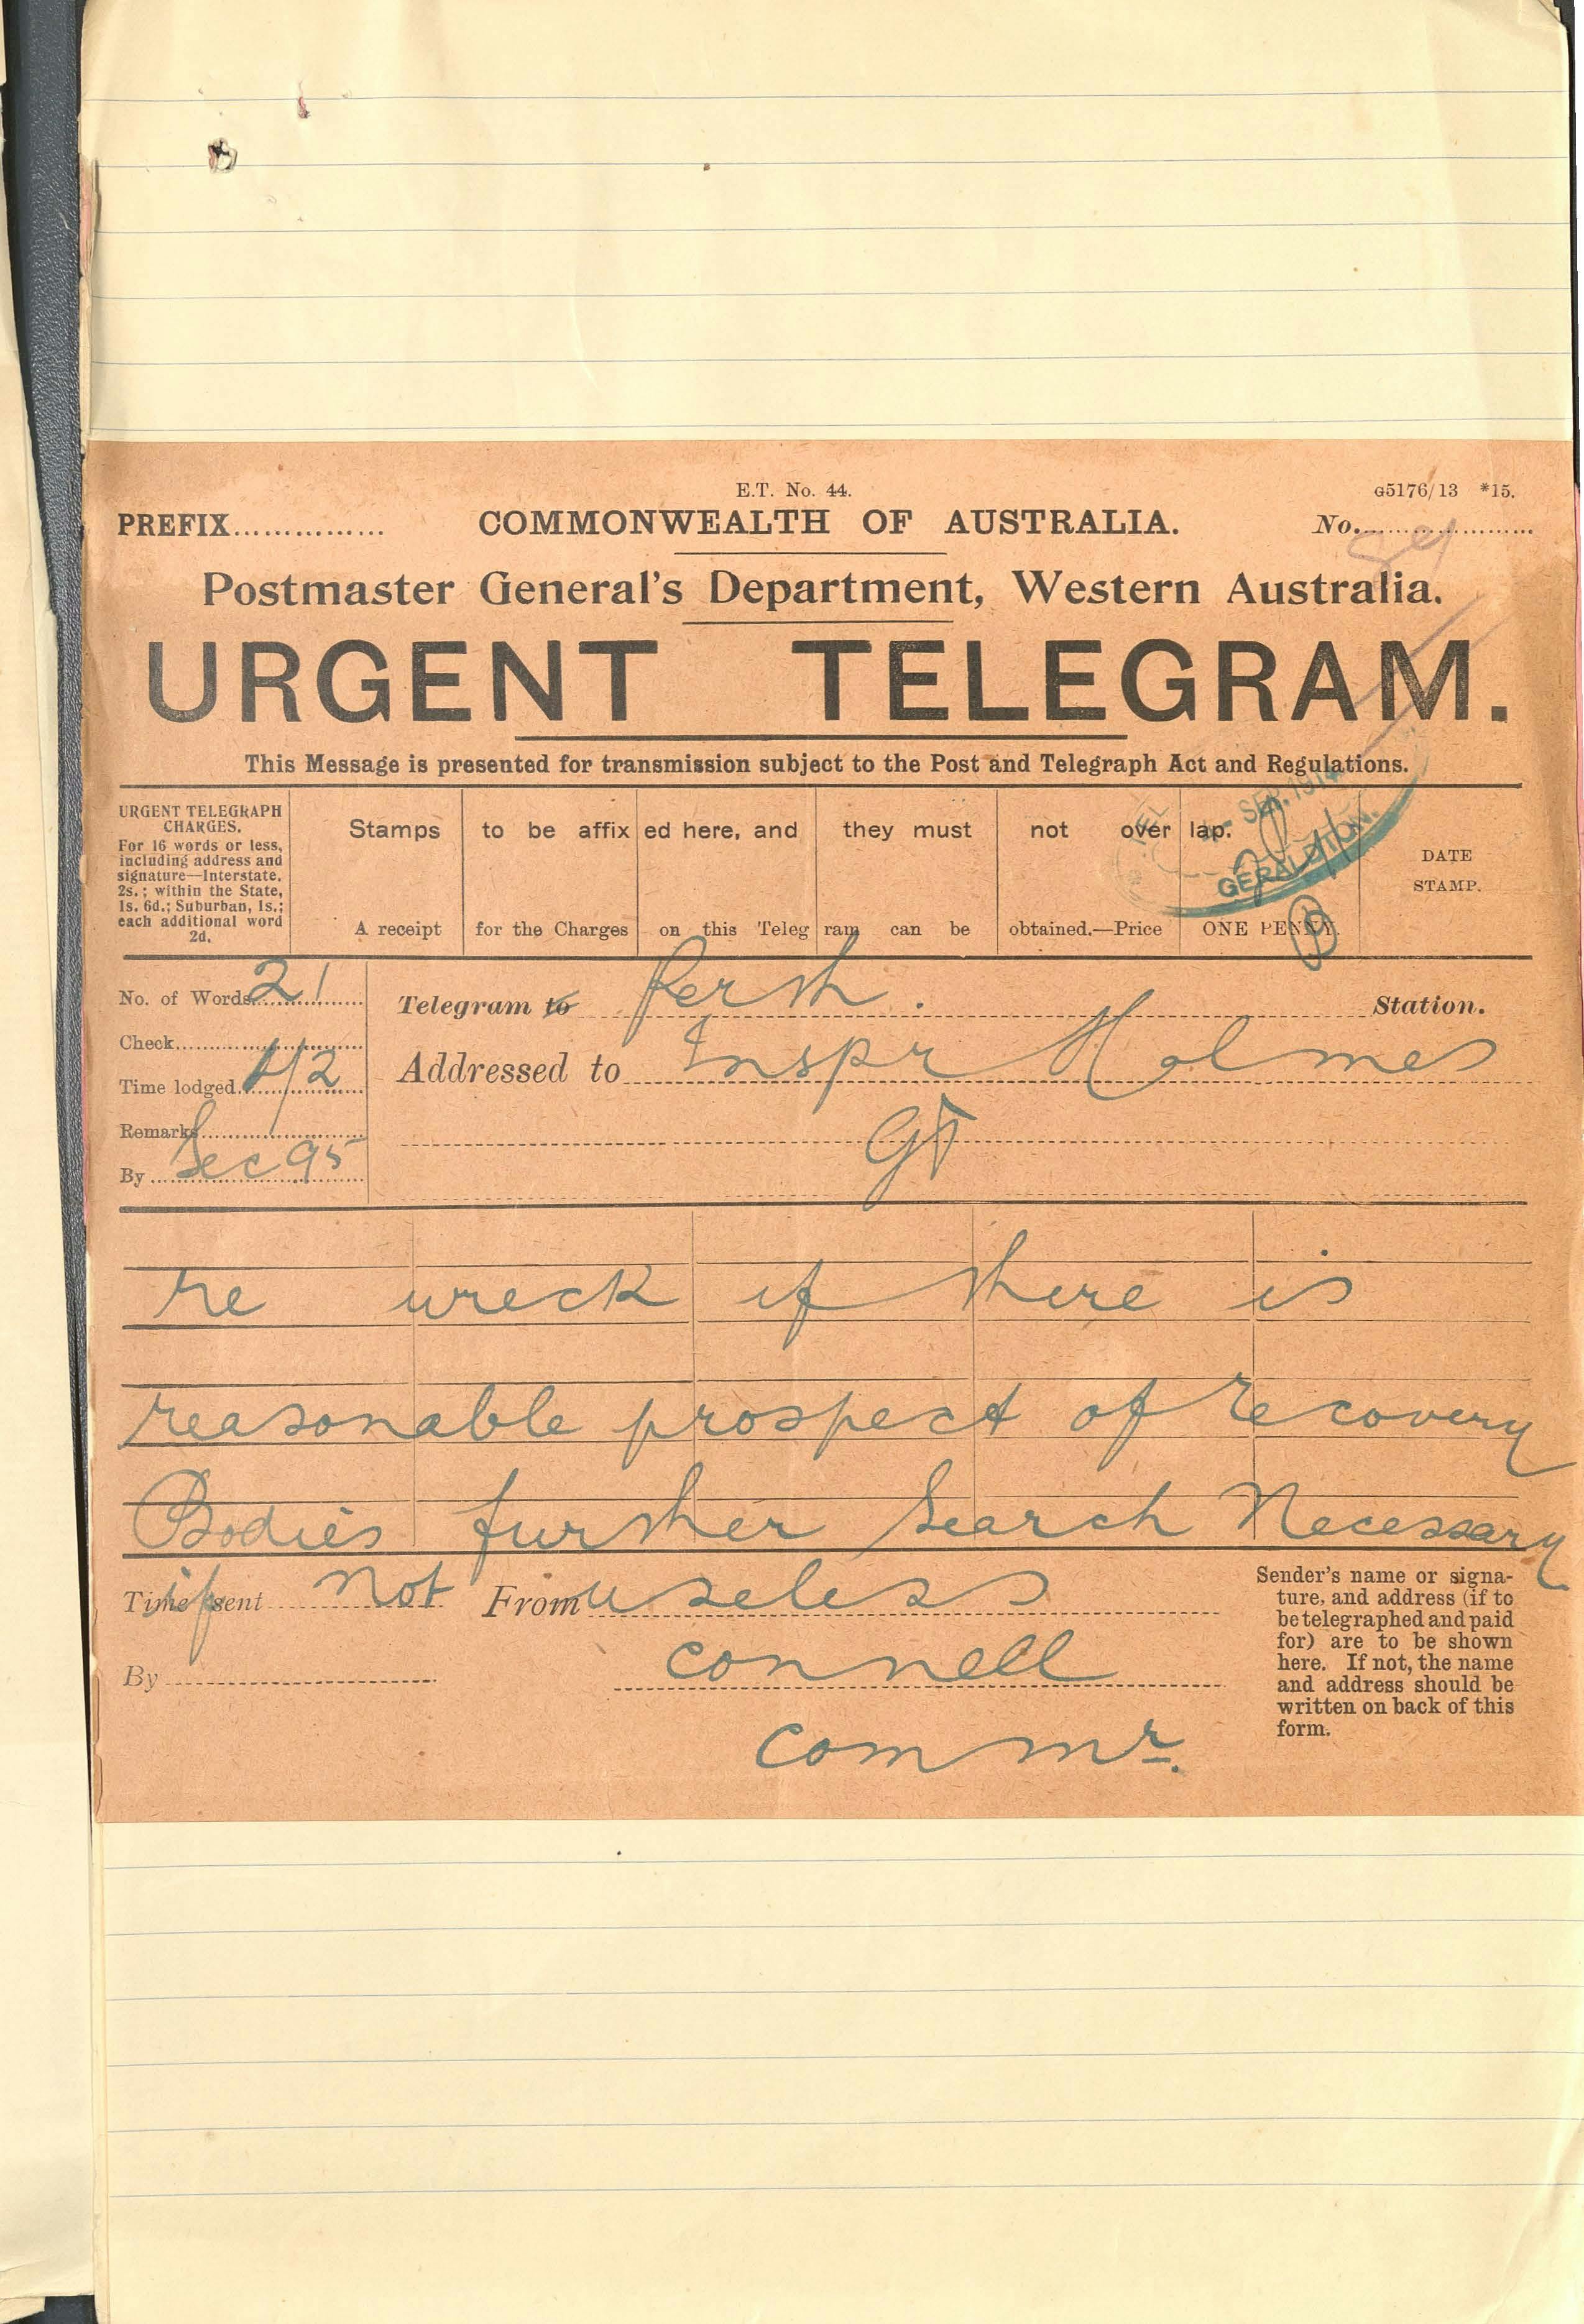 Copy of an urgent telegram advising on the loss of the Ivy